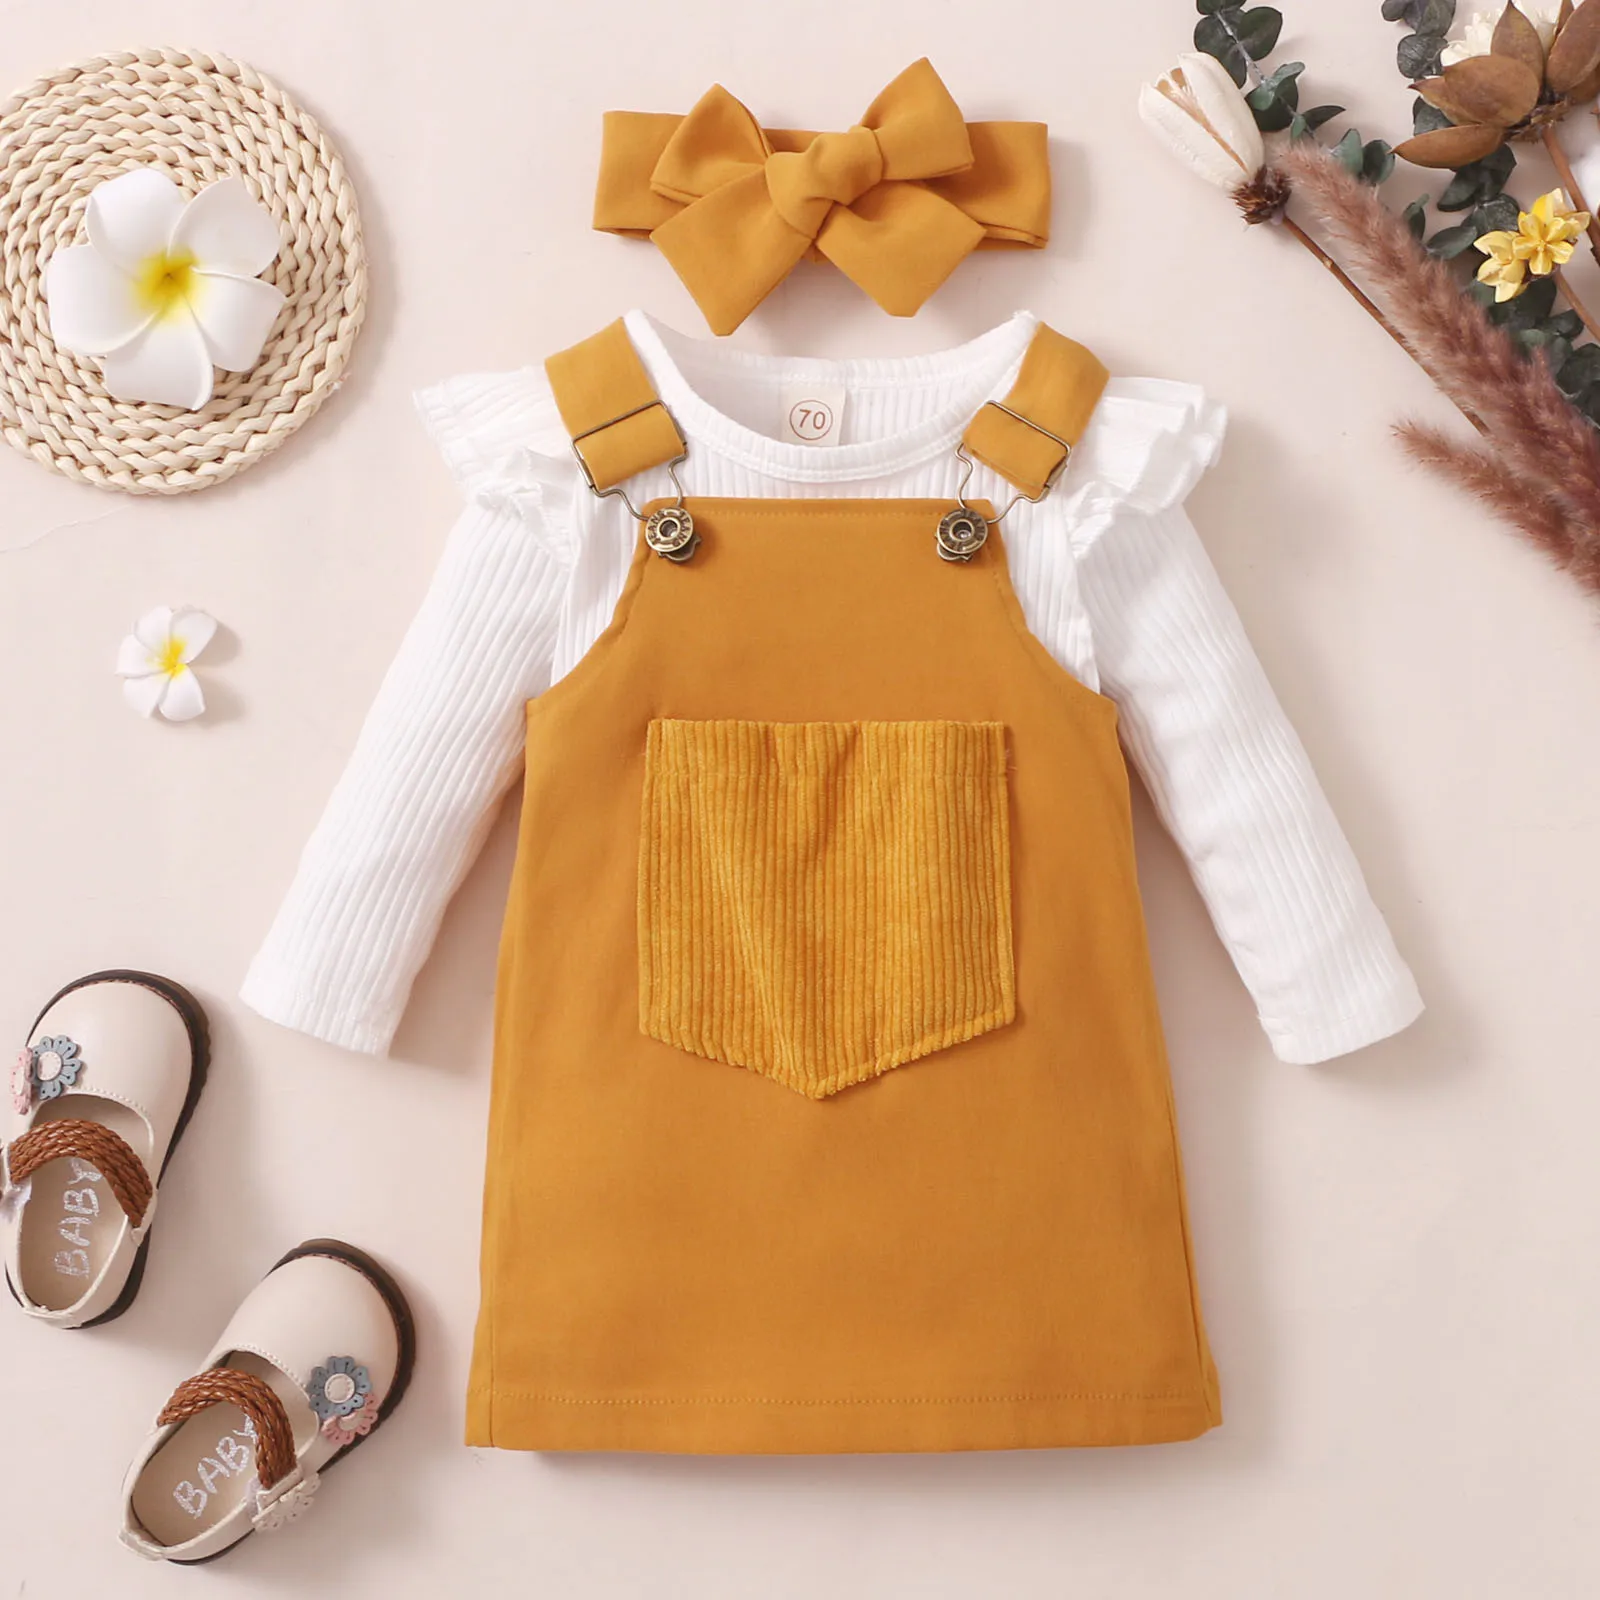 

Girl Clothes 4t Baby Blanket Outfit Kids Outfit Infant Girls Autumn Baby Clothe Pant Romper Baby Girl Clothe Set Autumn Clothe